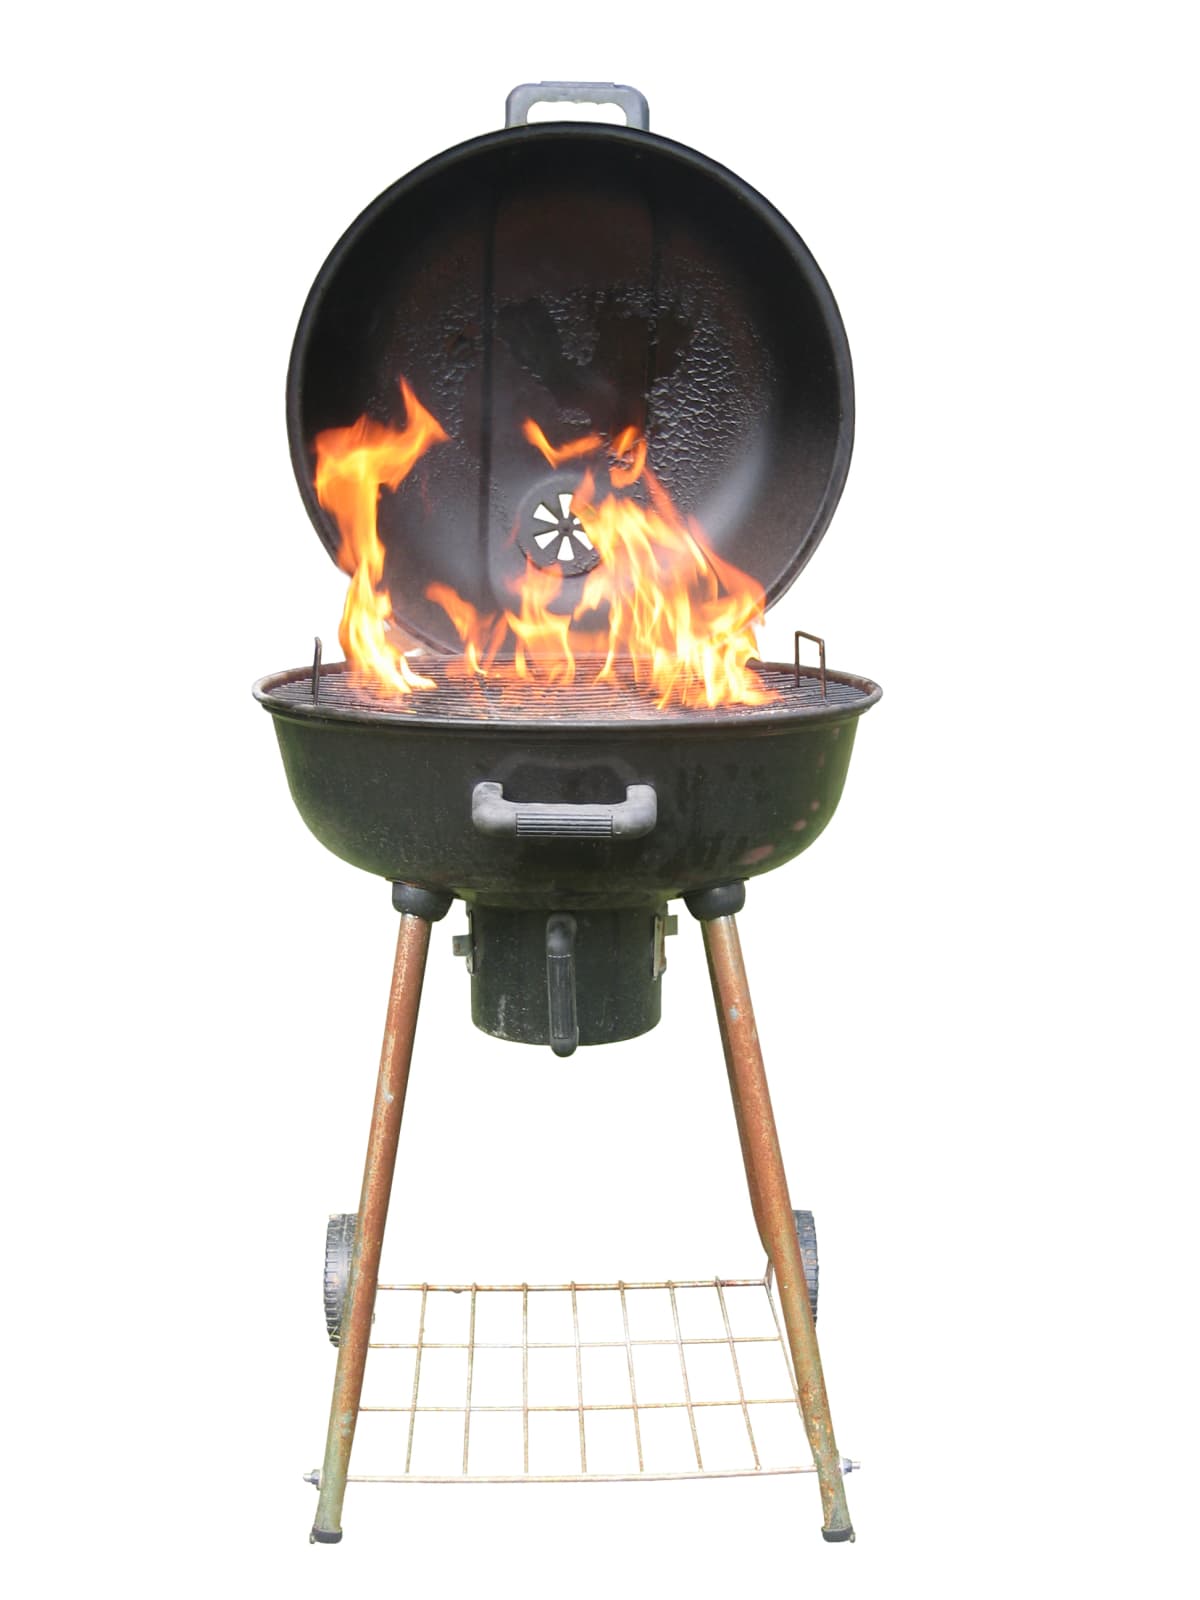 A barbecue grill with flames.